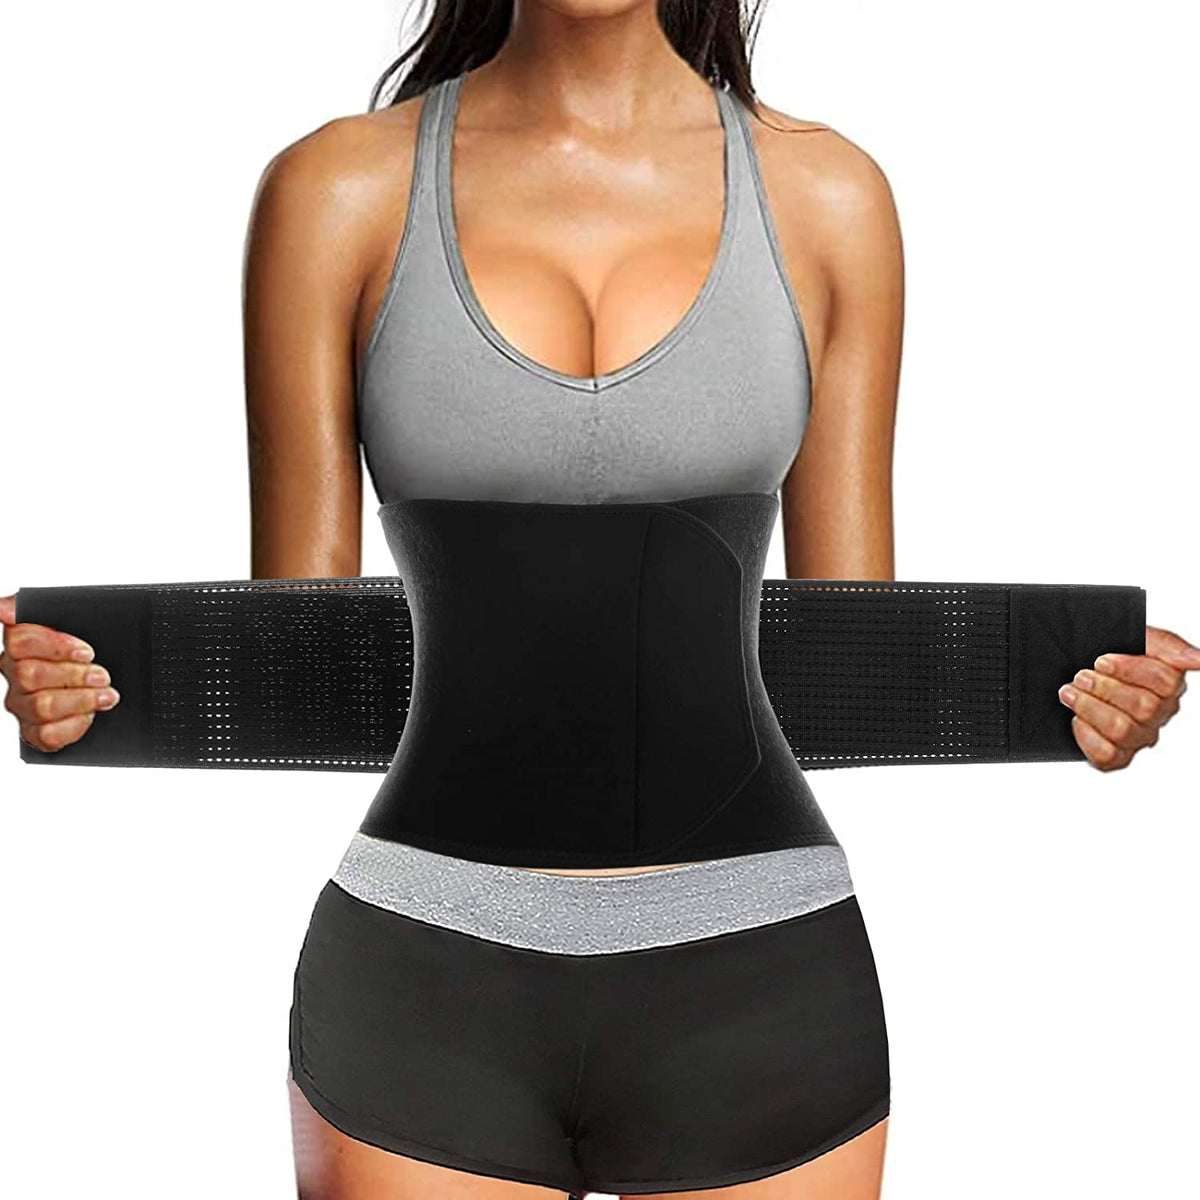 Body Shapers for sale in Johannesburg